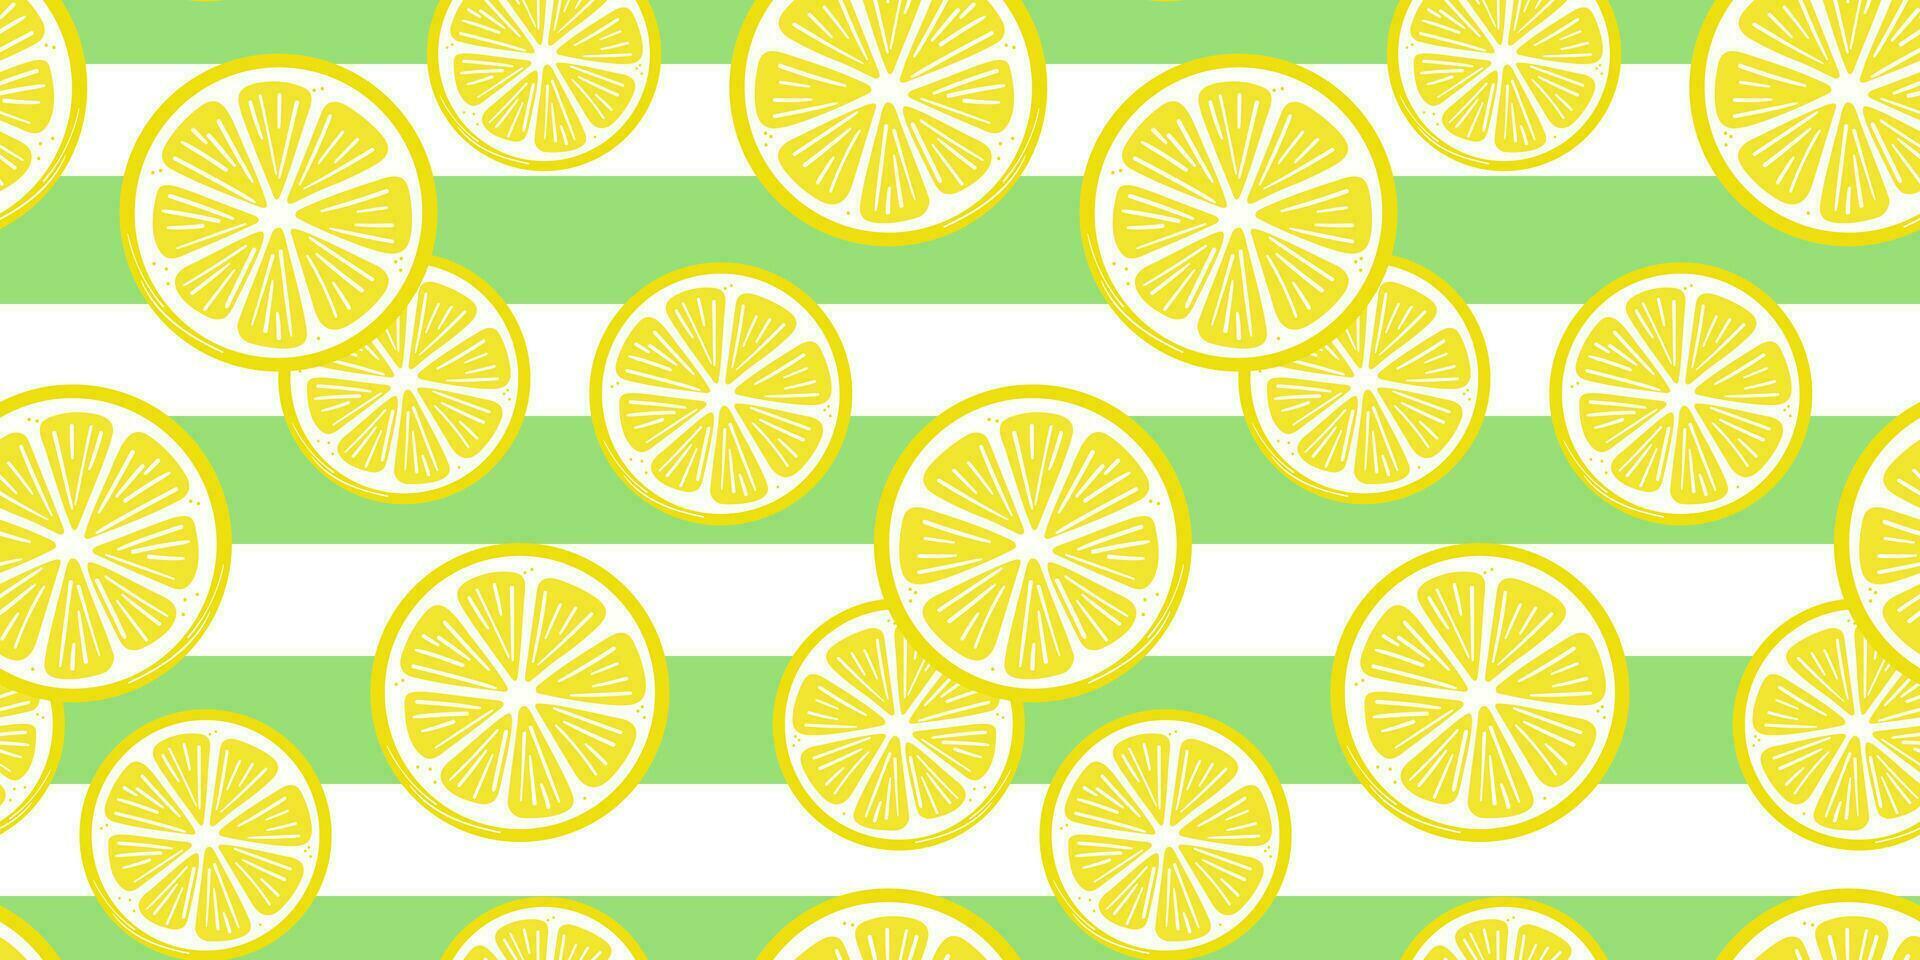 Lemon slices vector background with green stripes, seamless pattern